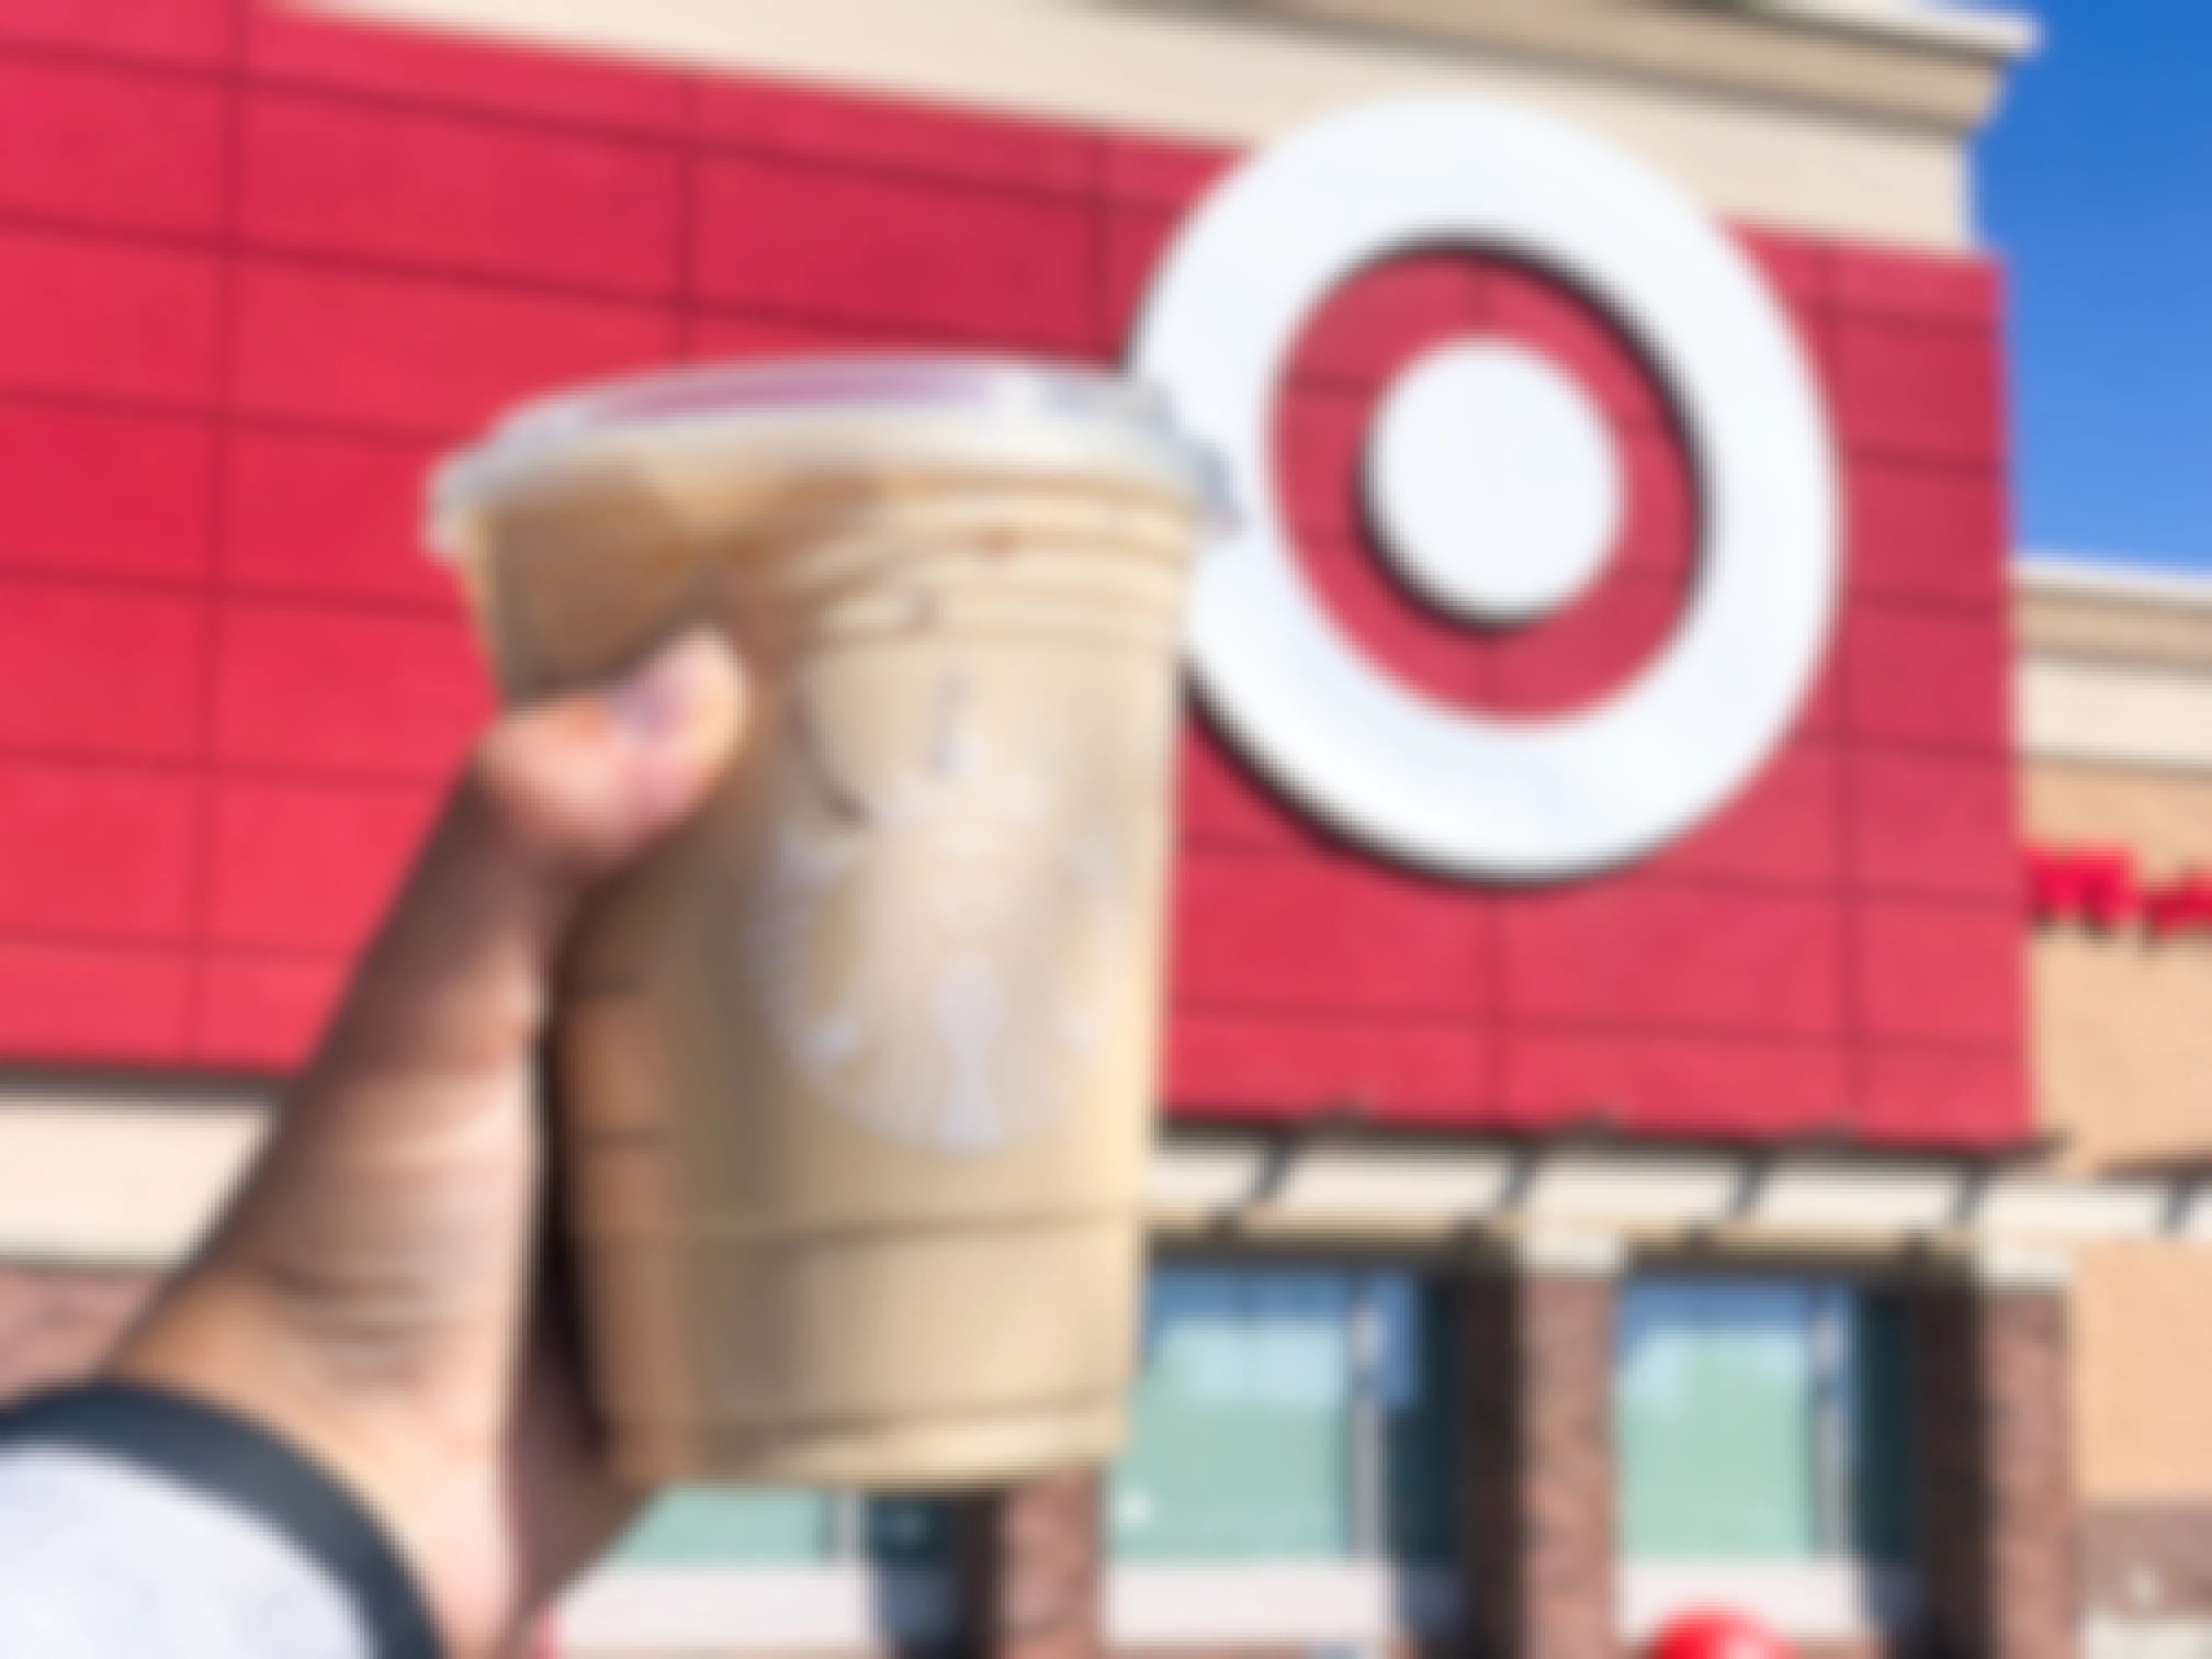 A person's hand holding up a Starbucks iced coffee in front of a Target storefront.